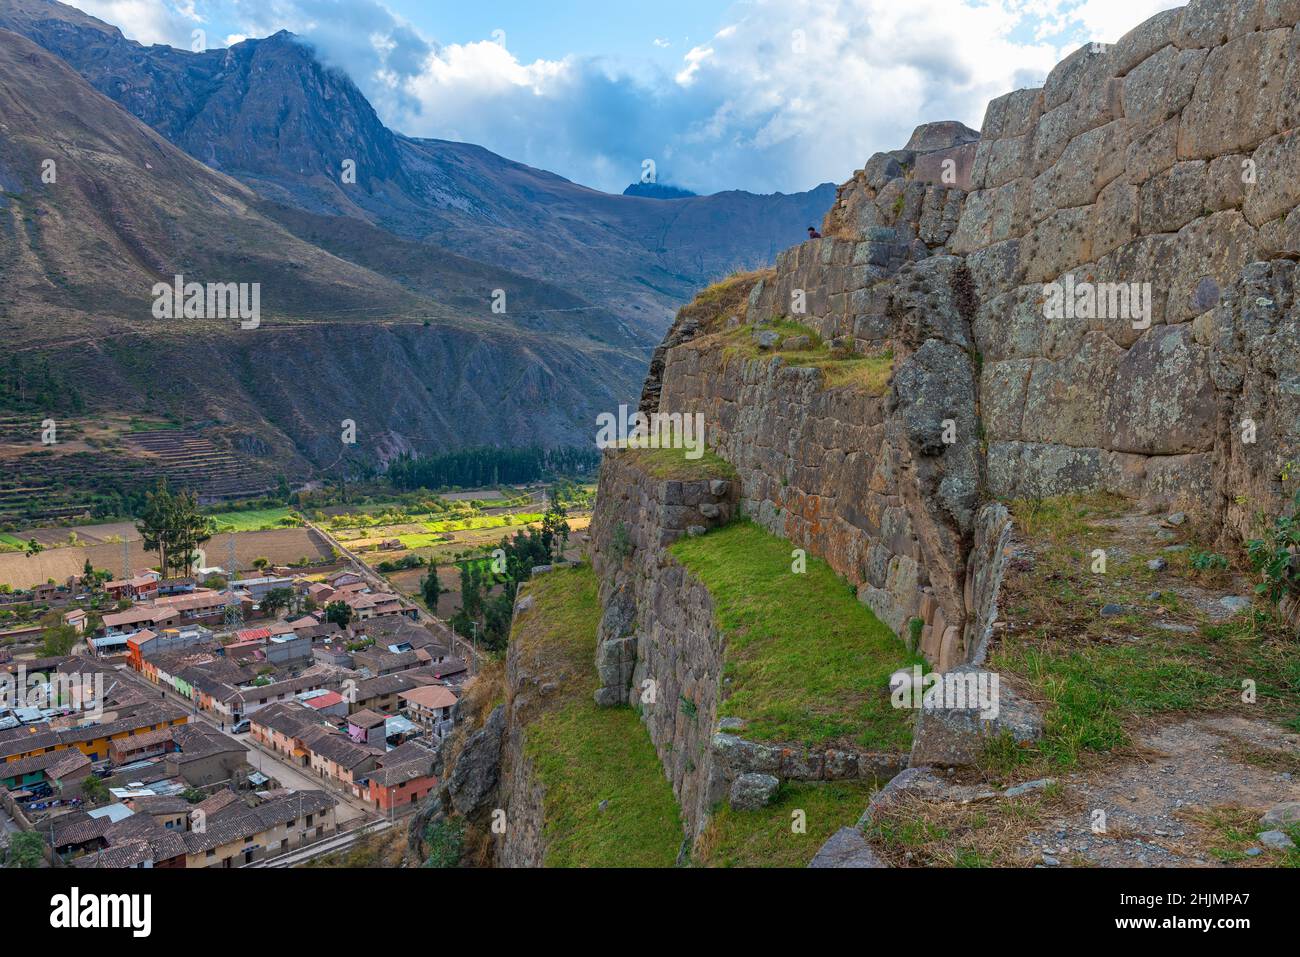 Inca ruin of Ollantaytambo at sunset with landscape of the Sacred Valley of the Inca, Cusco province, Peru. Stock Photo